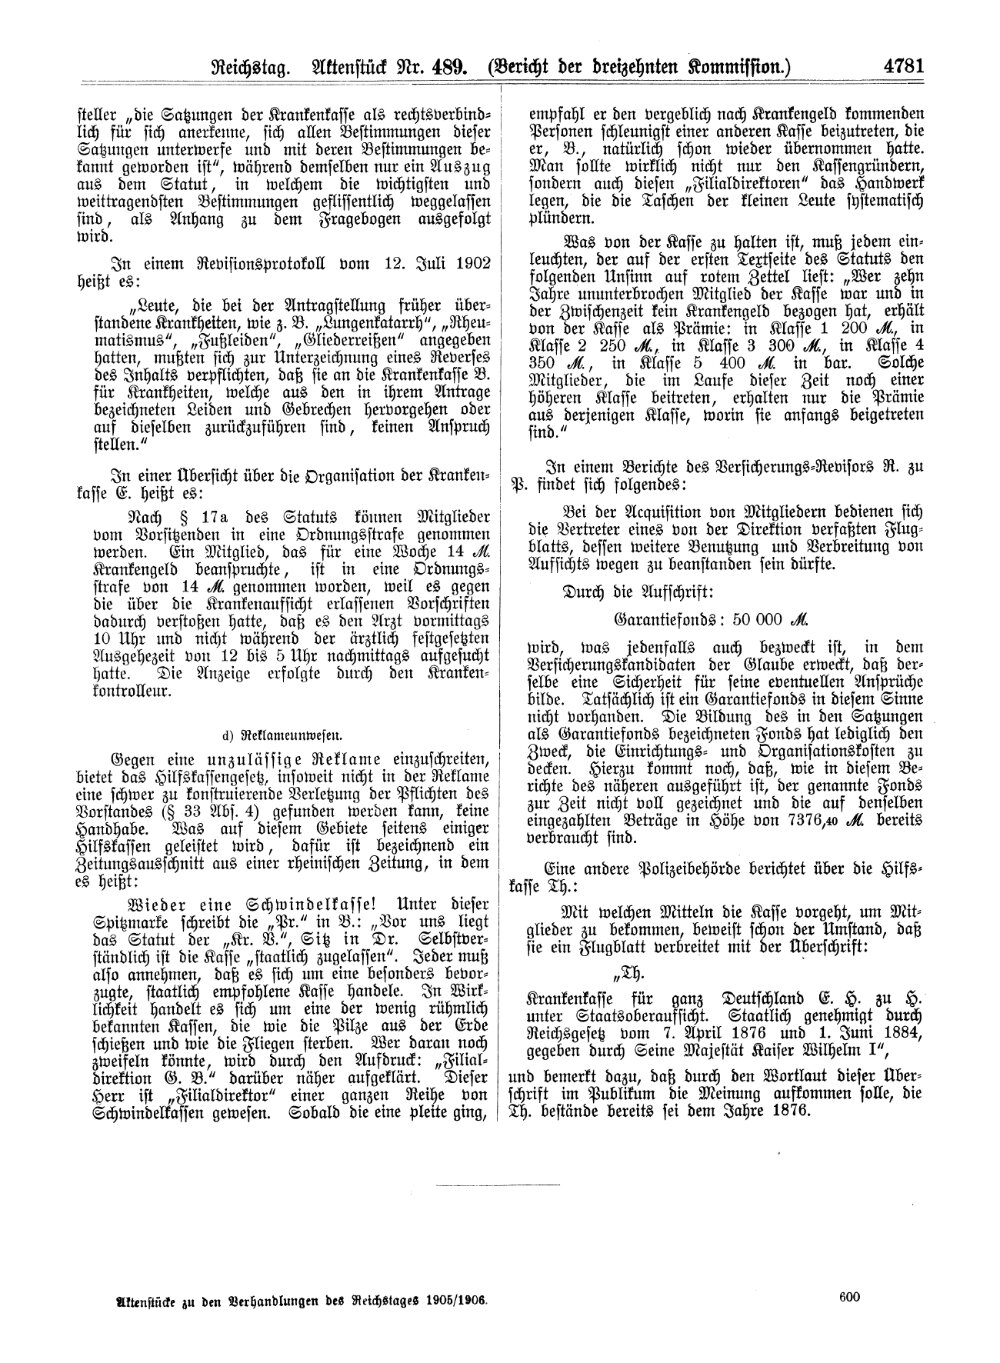 Scan of page 4781